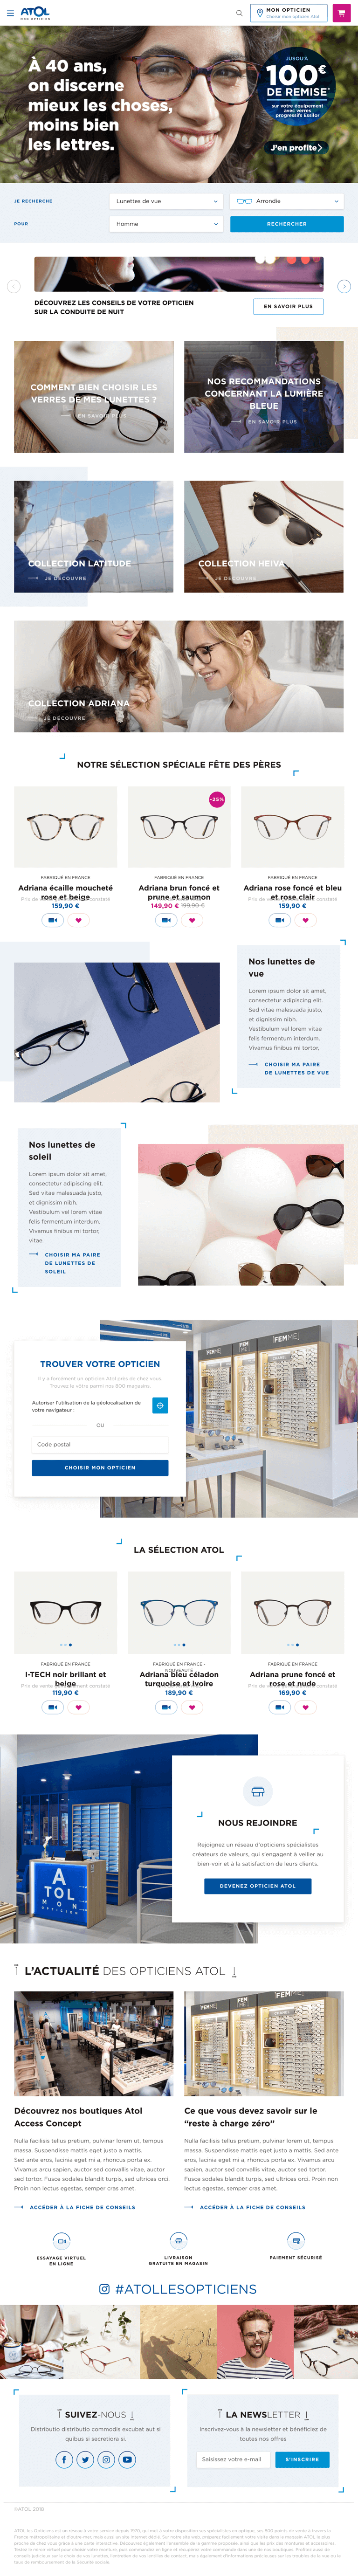 Agence-DND-Creation-Site-ECommerce-Atol-les-Opticiens